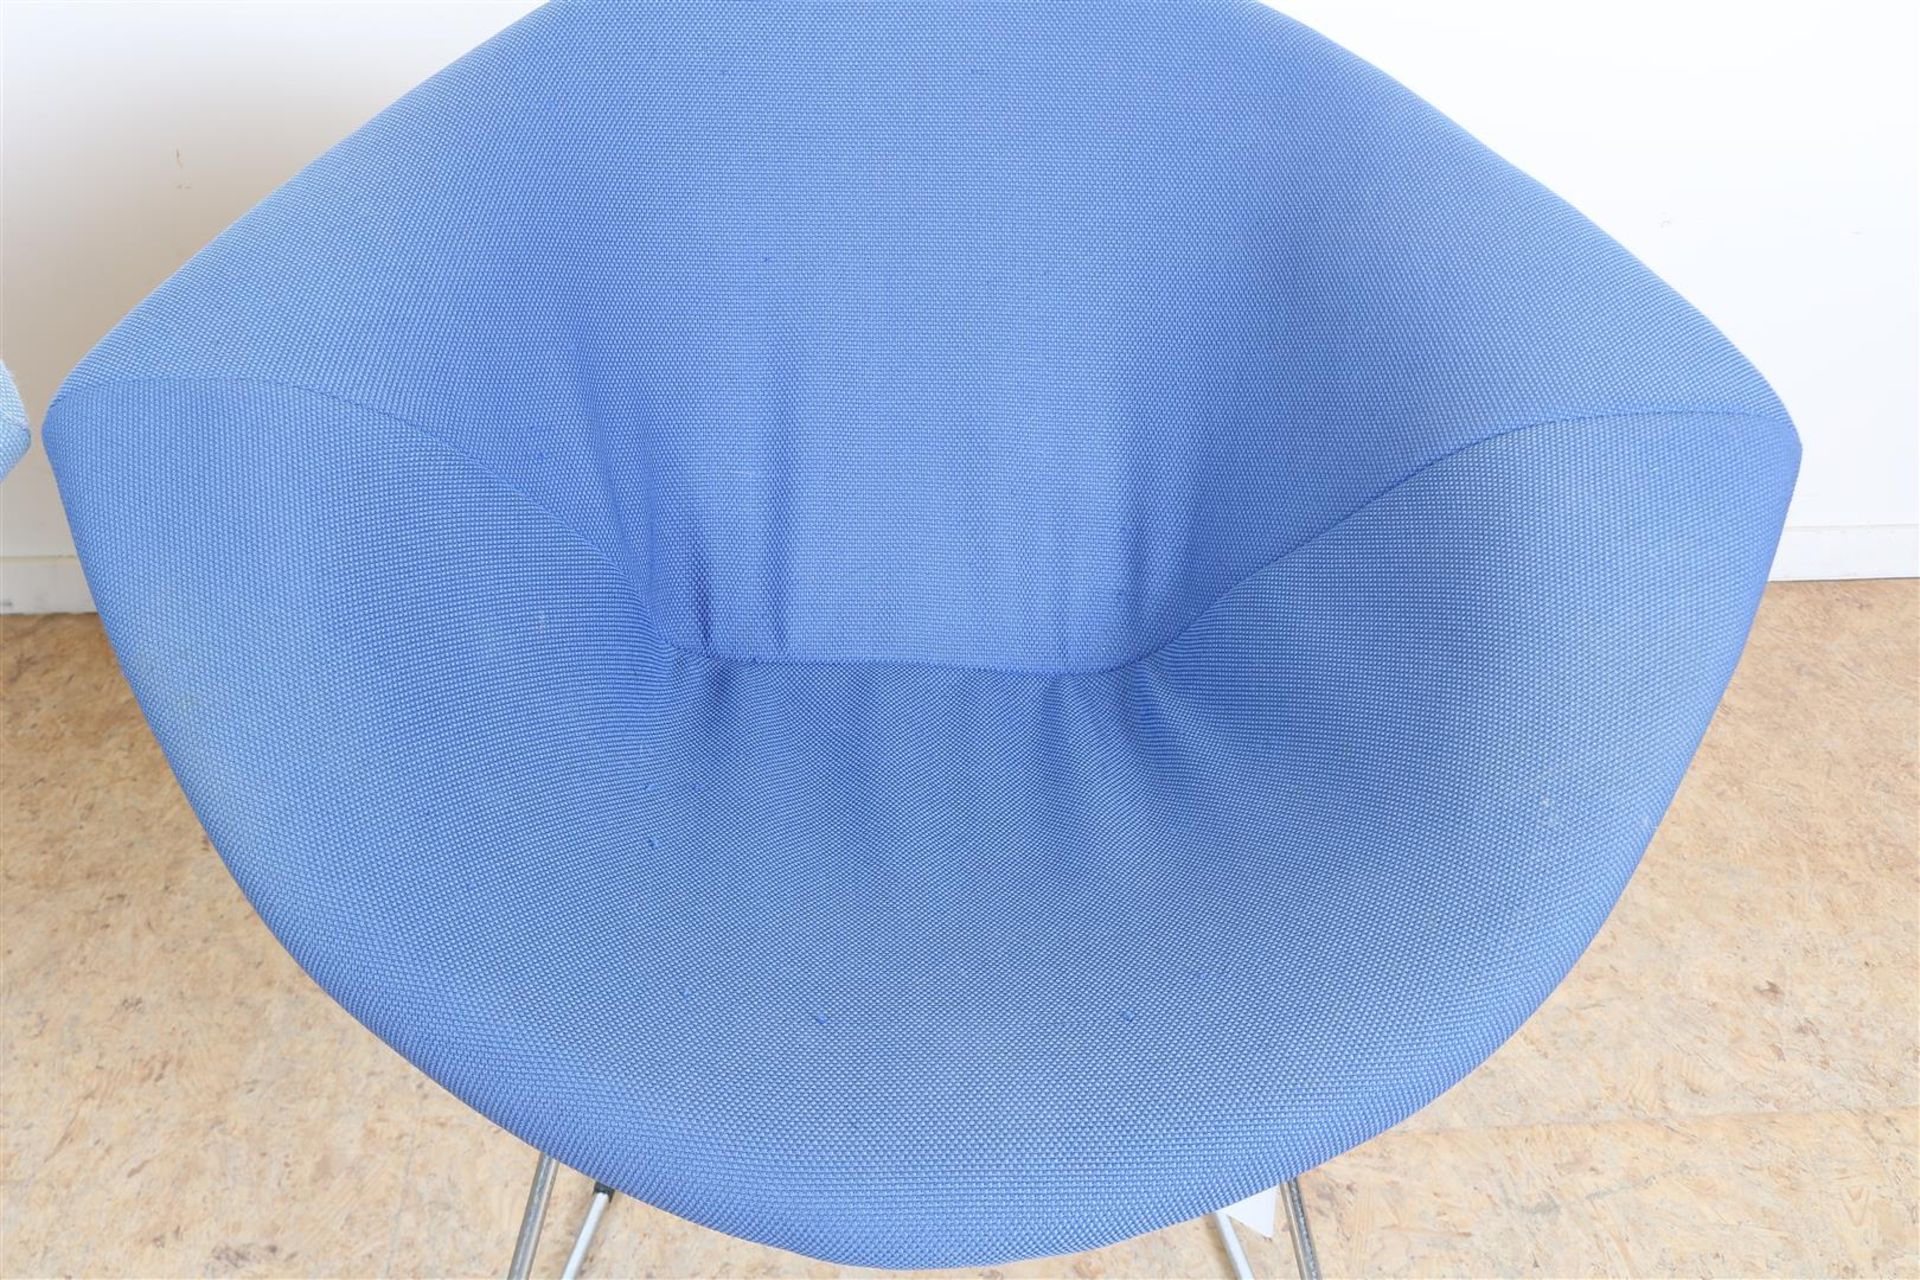 Set of wire steel design chairs with blue upholstery, designed in 1952 by Harry Bertoia for Knoll. - Image 4 of 5